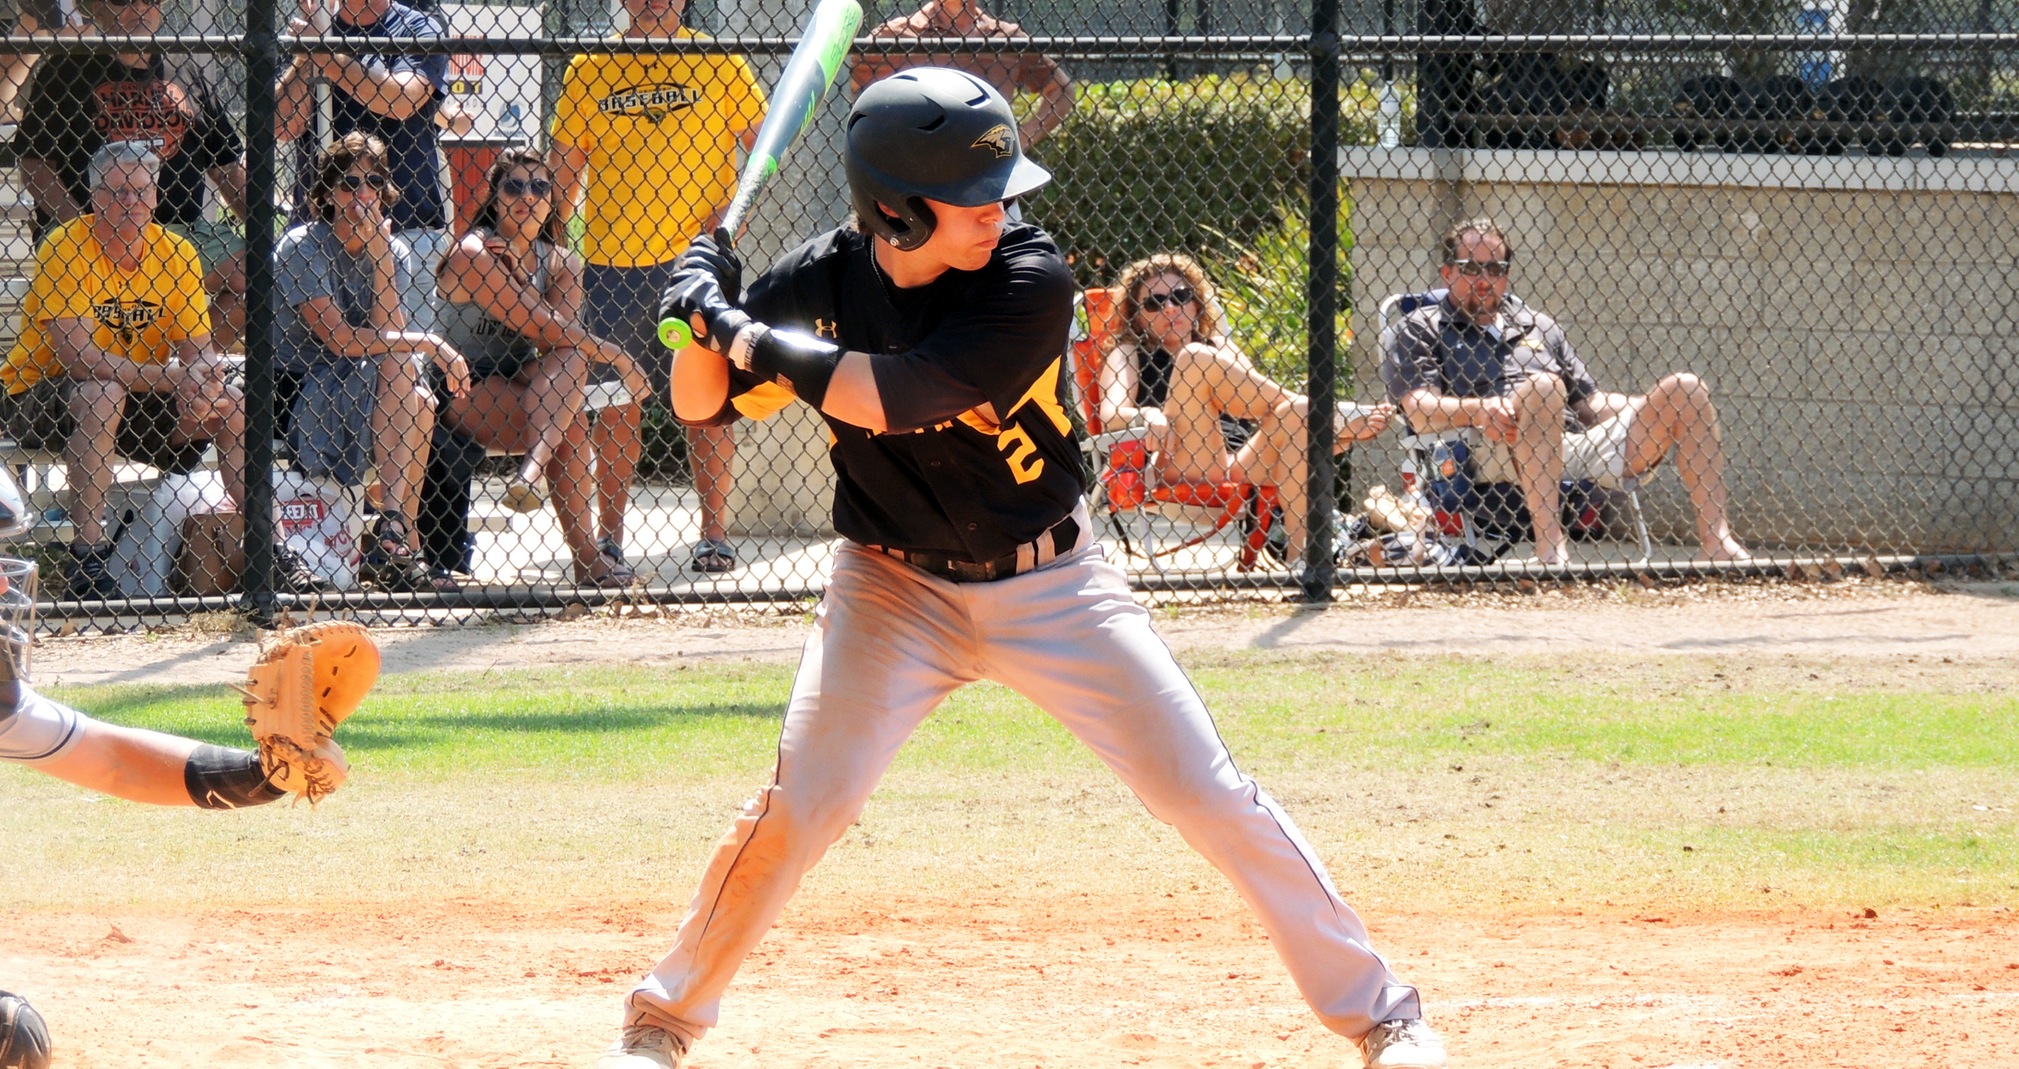 Dylan Ott had three hits and a career-best five RBIs during the Titans' first game with Bowdoin College.